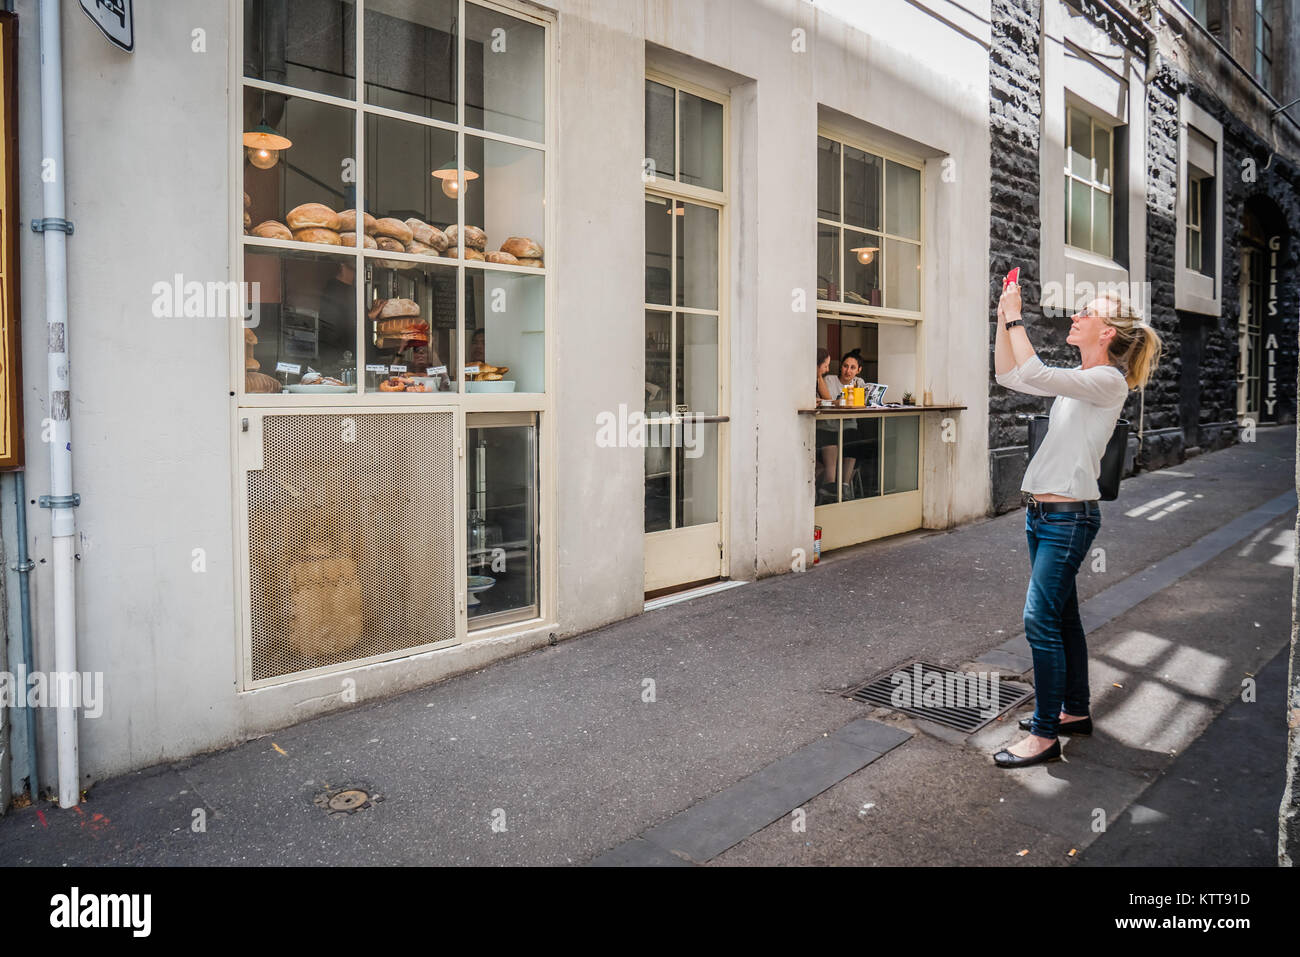 female tourist taking picture melbourne bakery shop Stock Photo